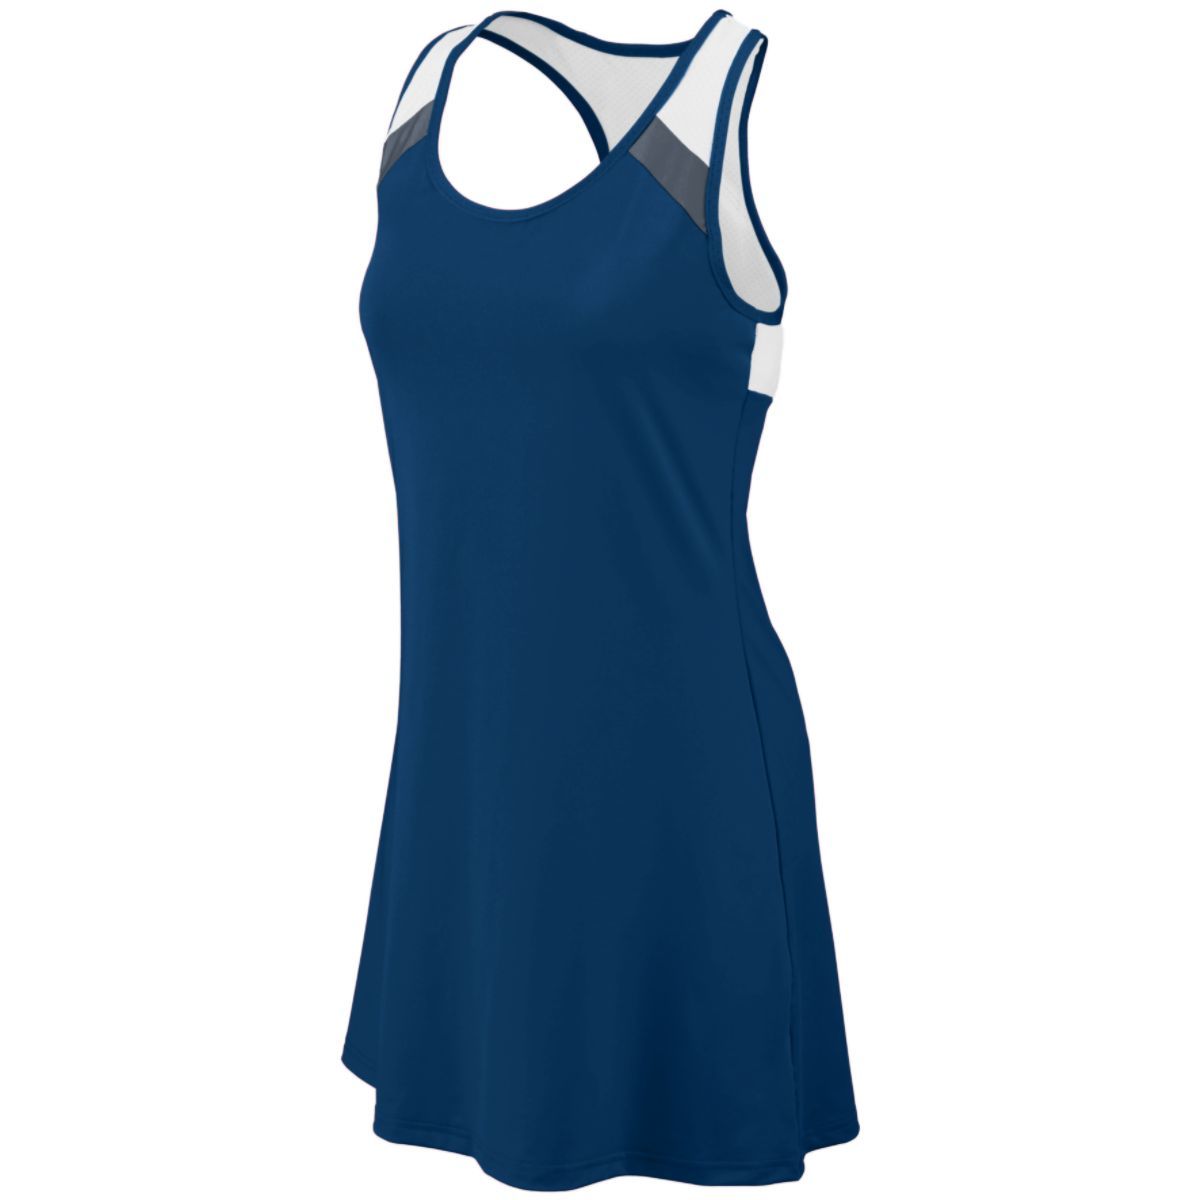 Augusta Sportswear Deuce Dress in Navy/Graphite/White  -Part of the Ladies, Augusta-Products, Tennis, Shirts product lines at KanaleyCreations.com